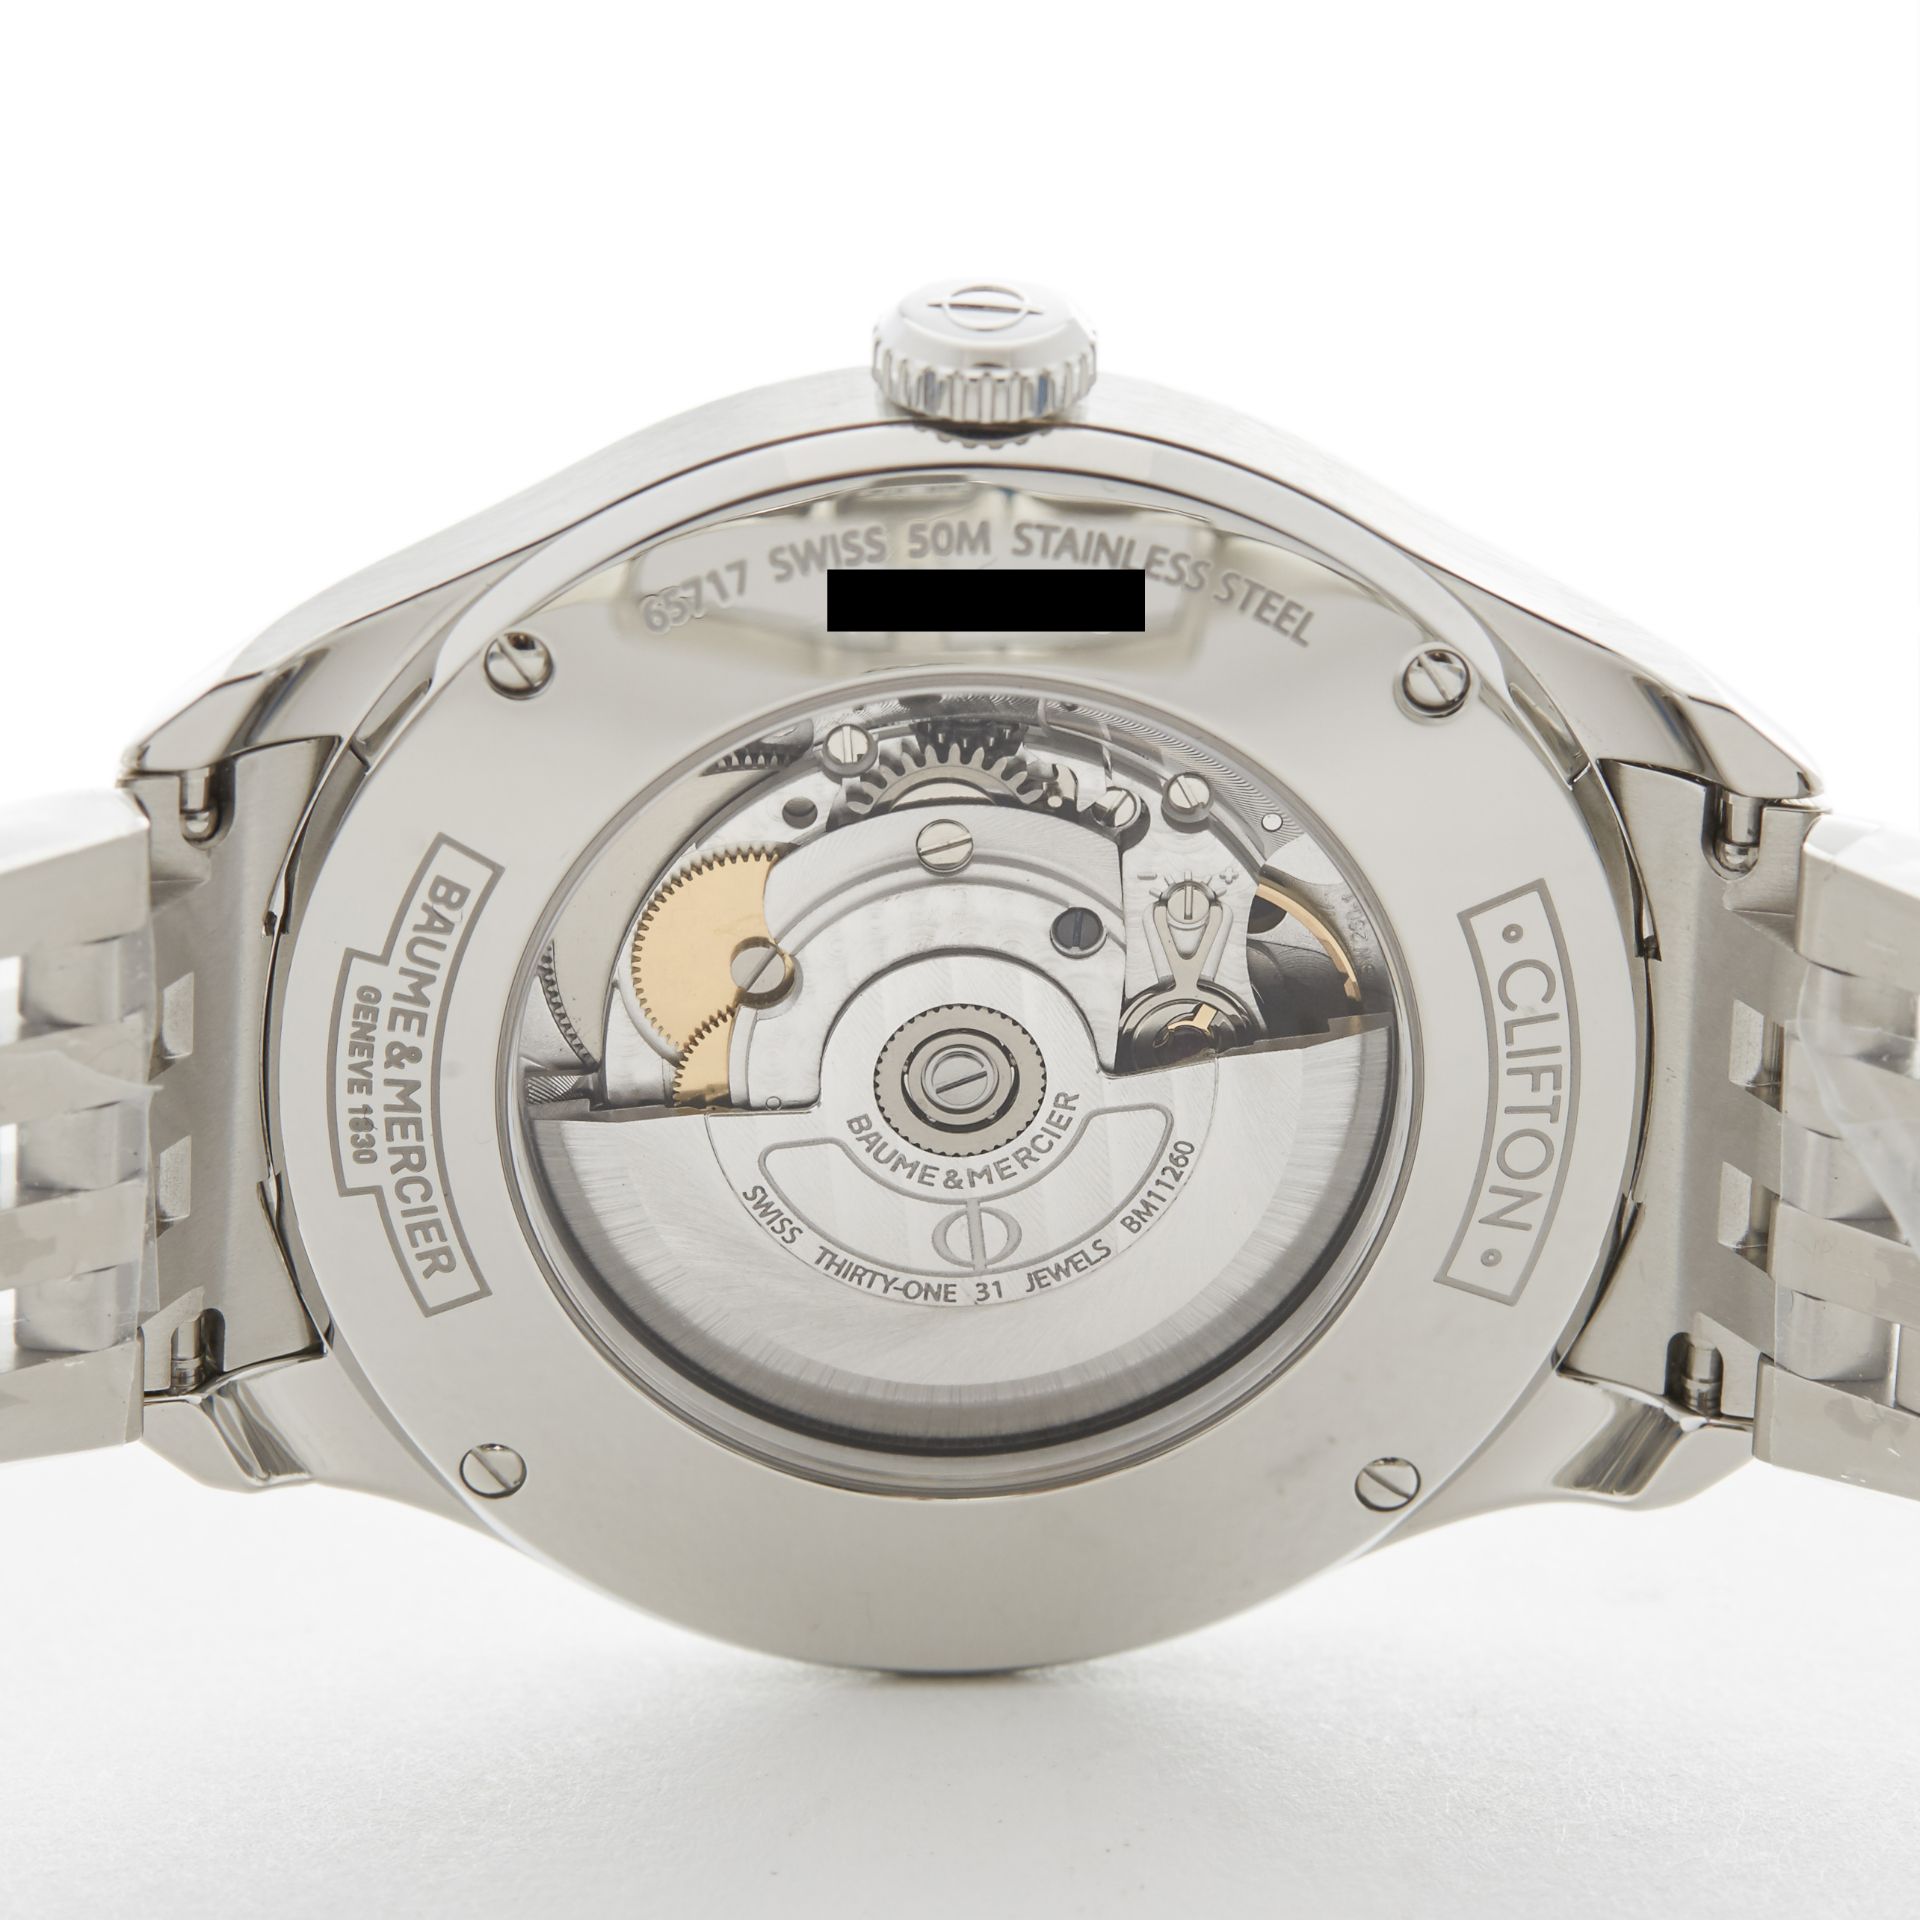 Baume & Mercier, Clifton 40mm Stainless Steel M0A10141 - Image 8 of 8